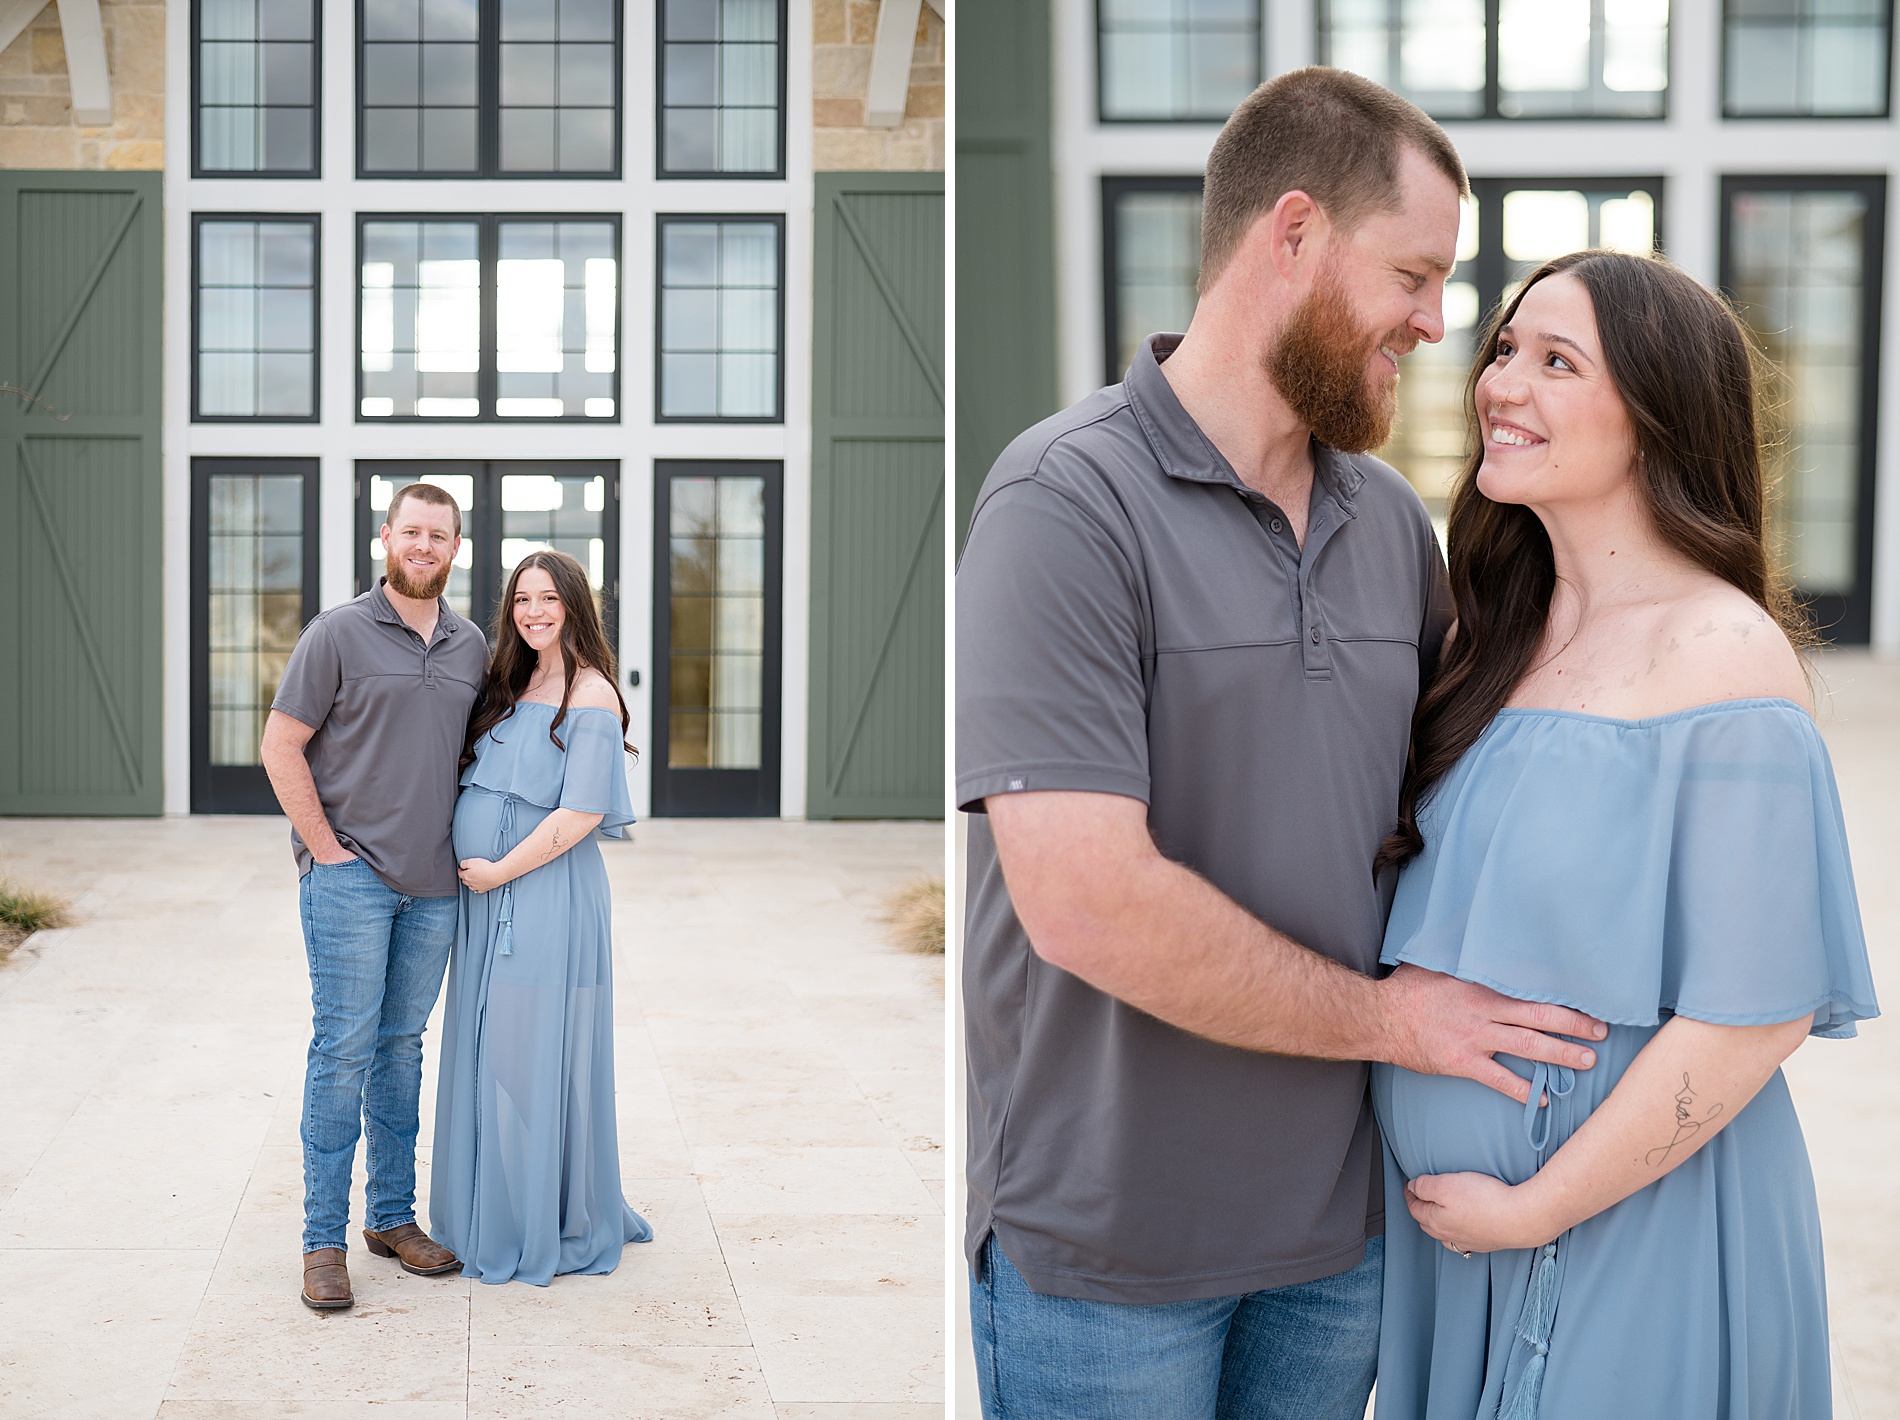 timeless maternity portraits taken by Lindsey Dutton Photography, a Dallas maternity photographer
